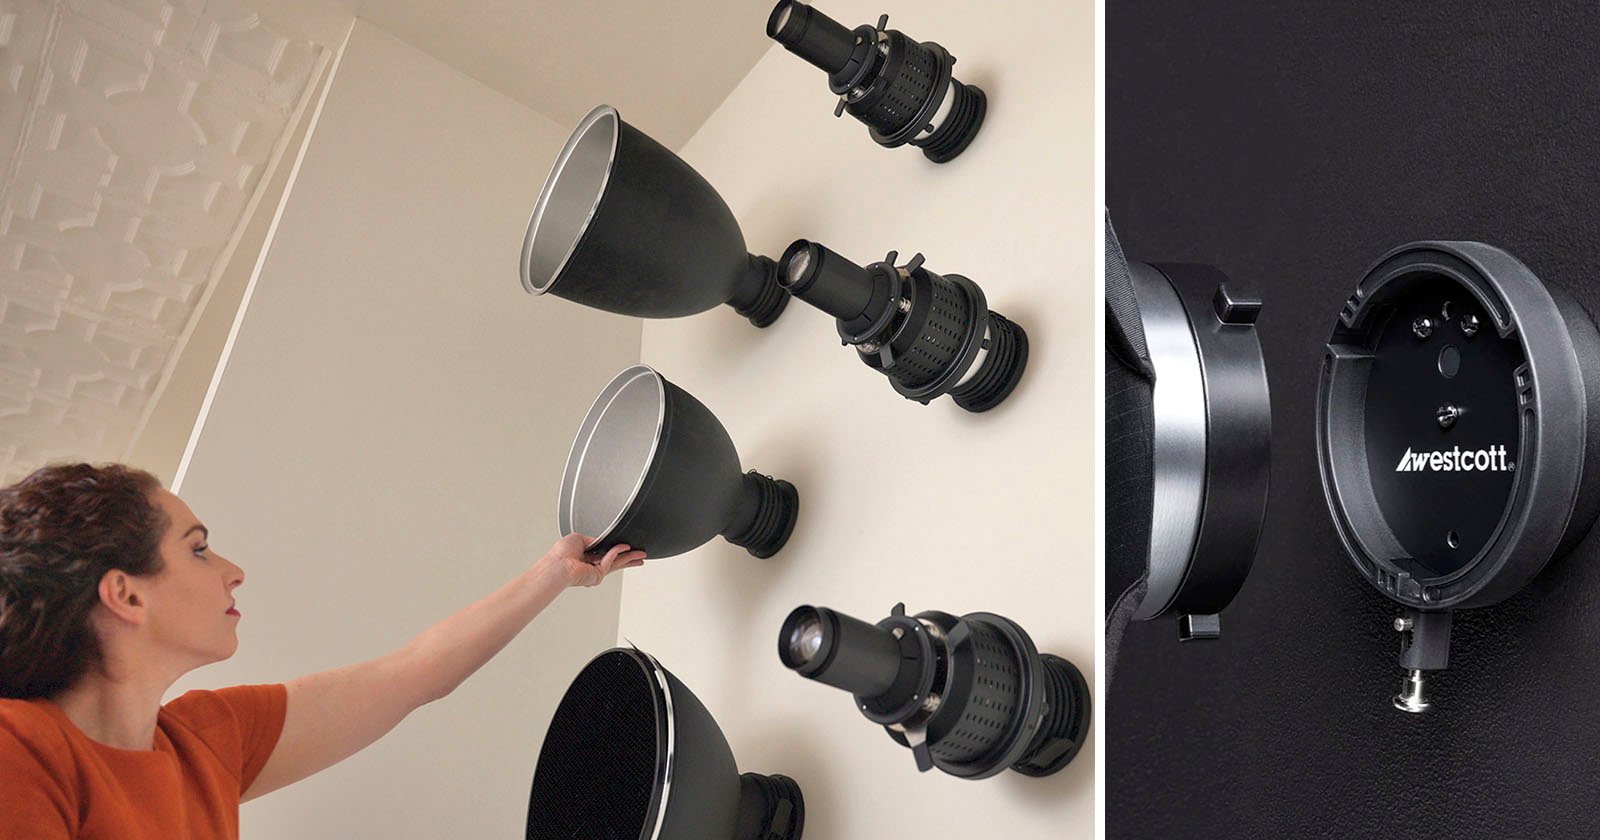 Organize Lighting Gear in Style Using Westcotts Float Wall Mount System